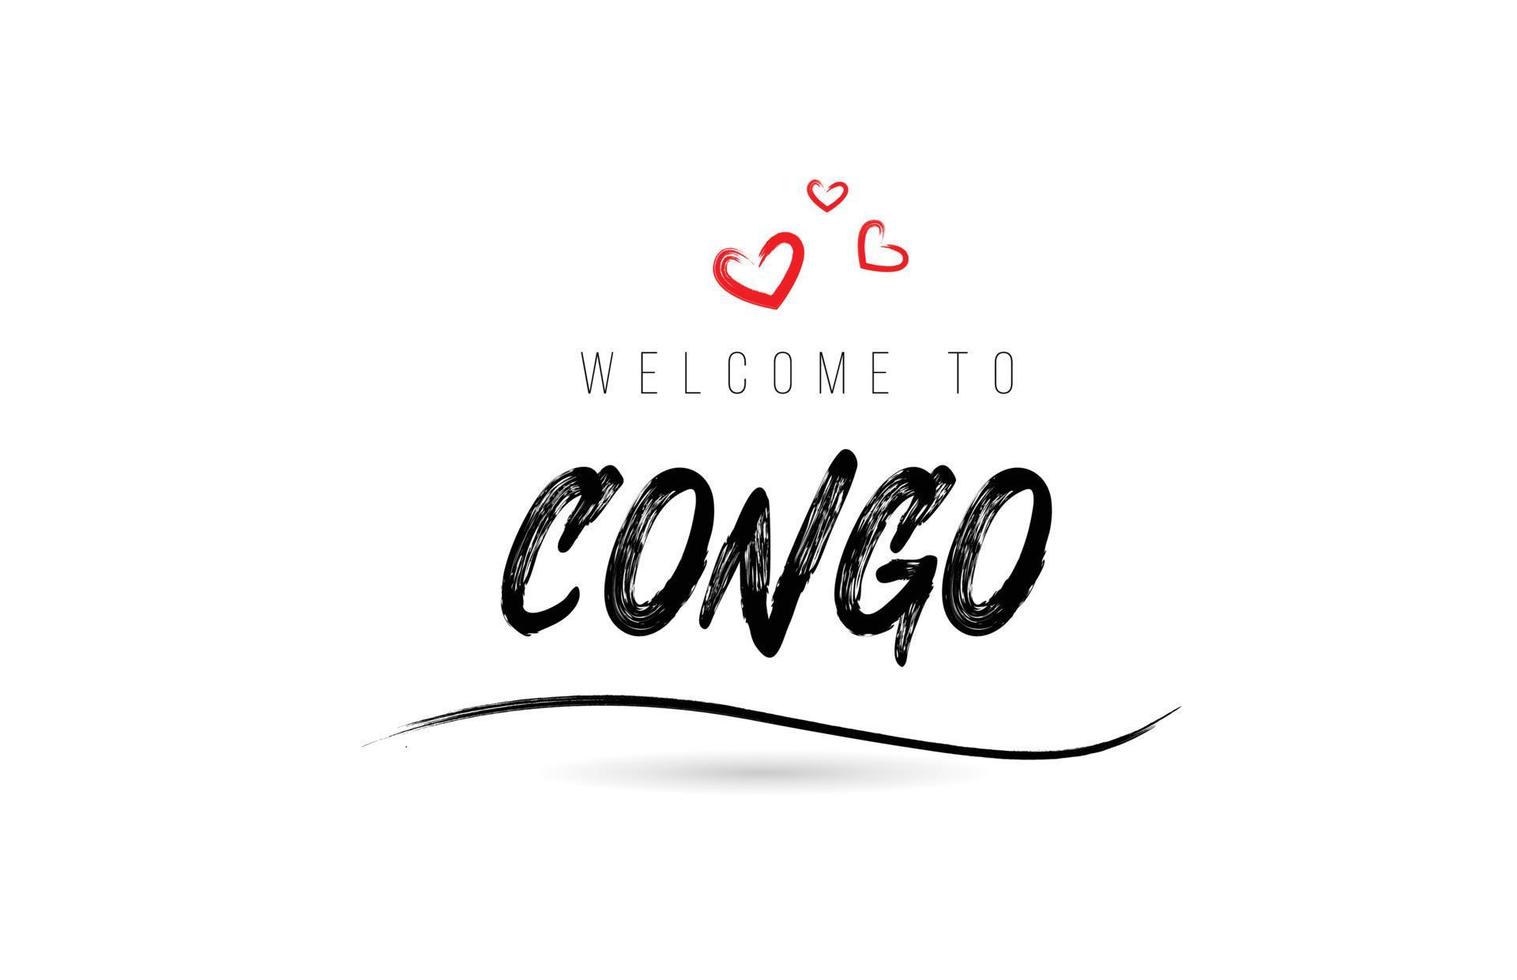 Welcome to CONGO country text typography with red love heart and black name vector